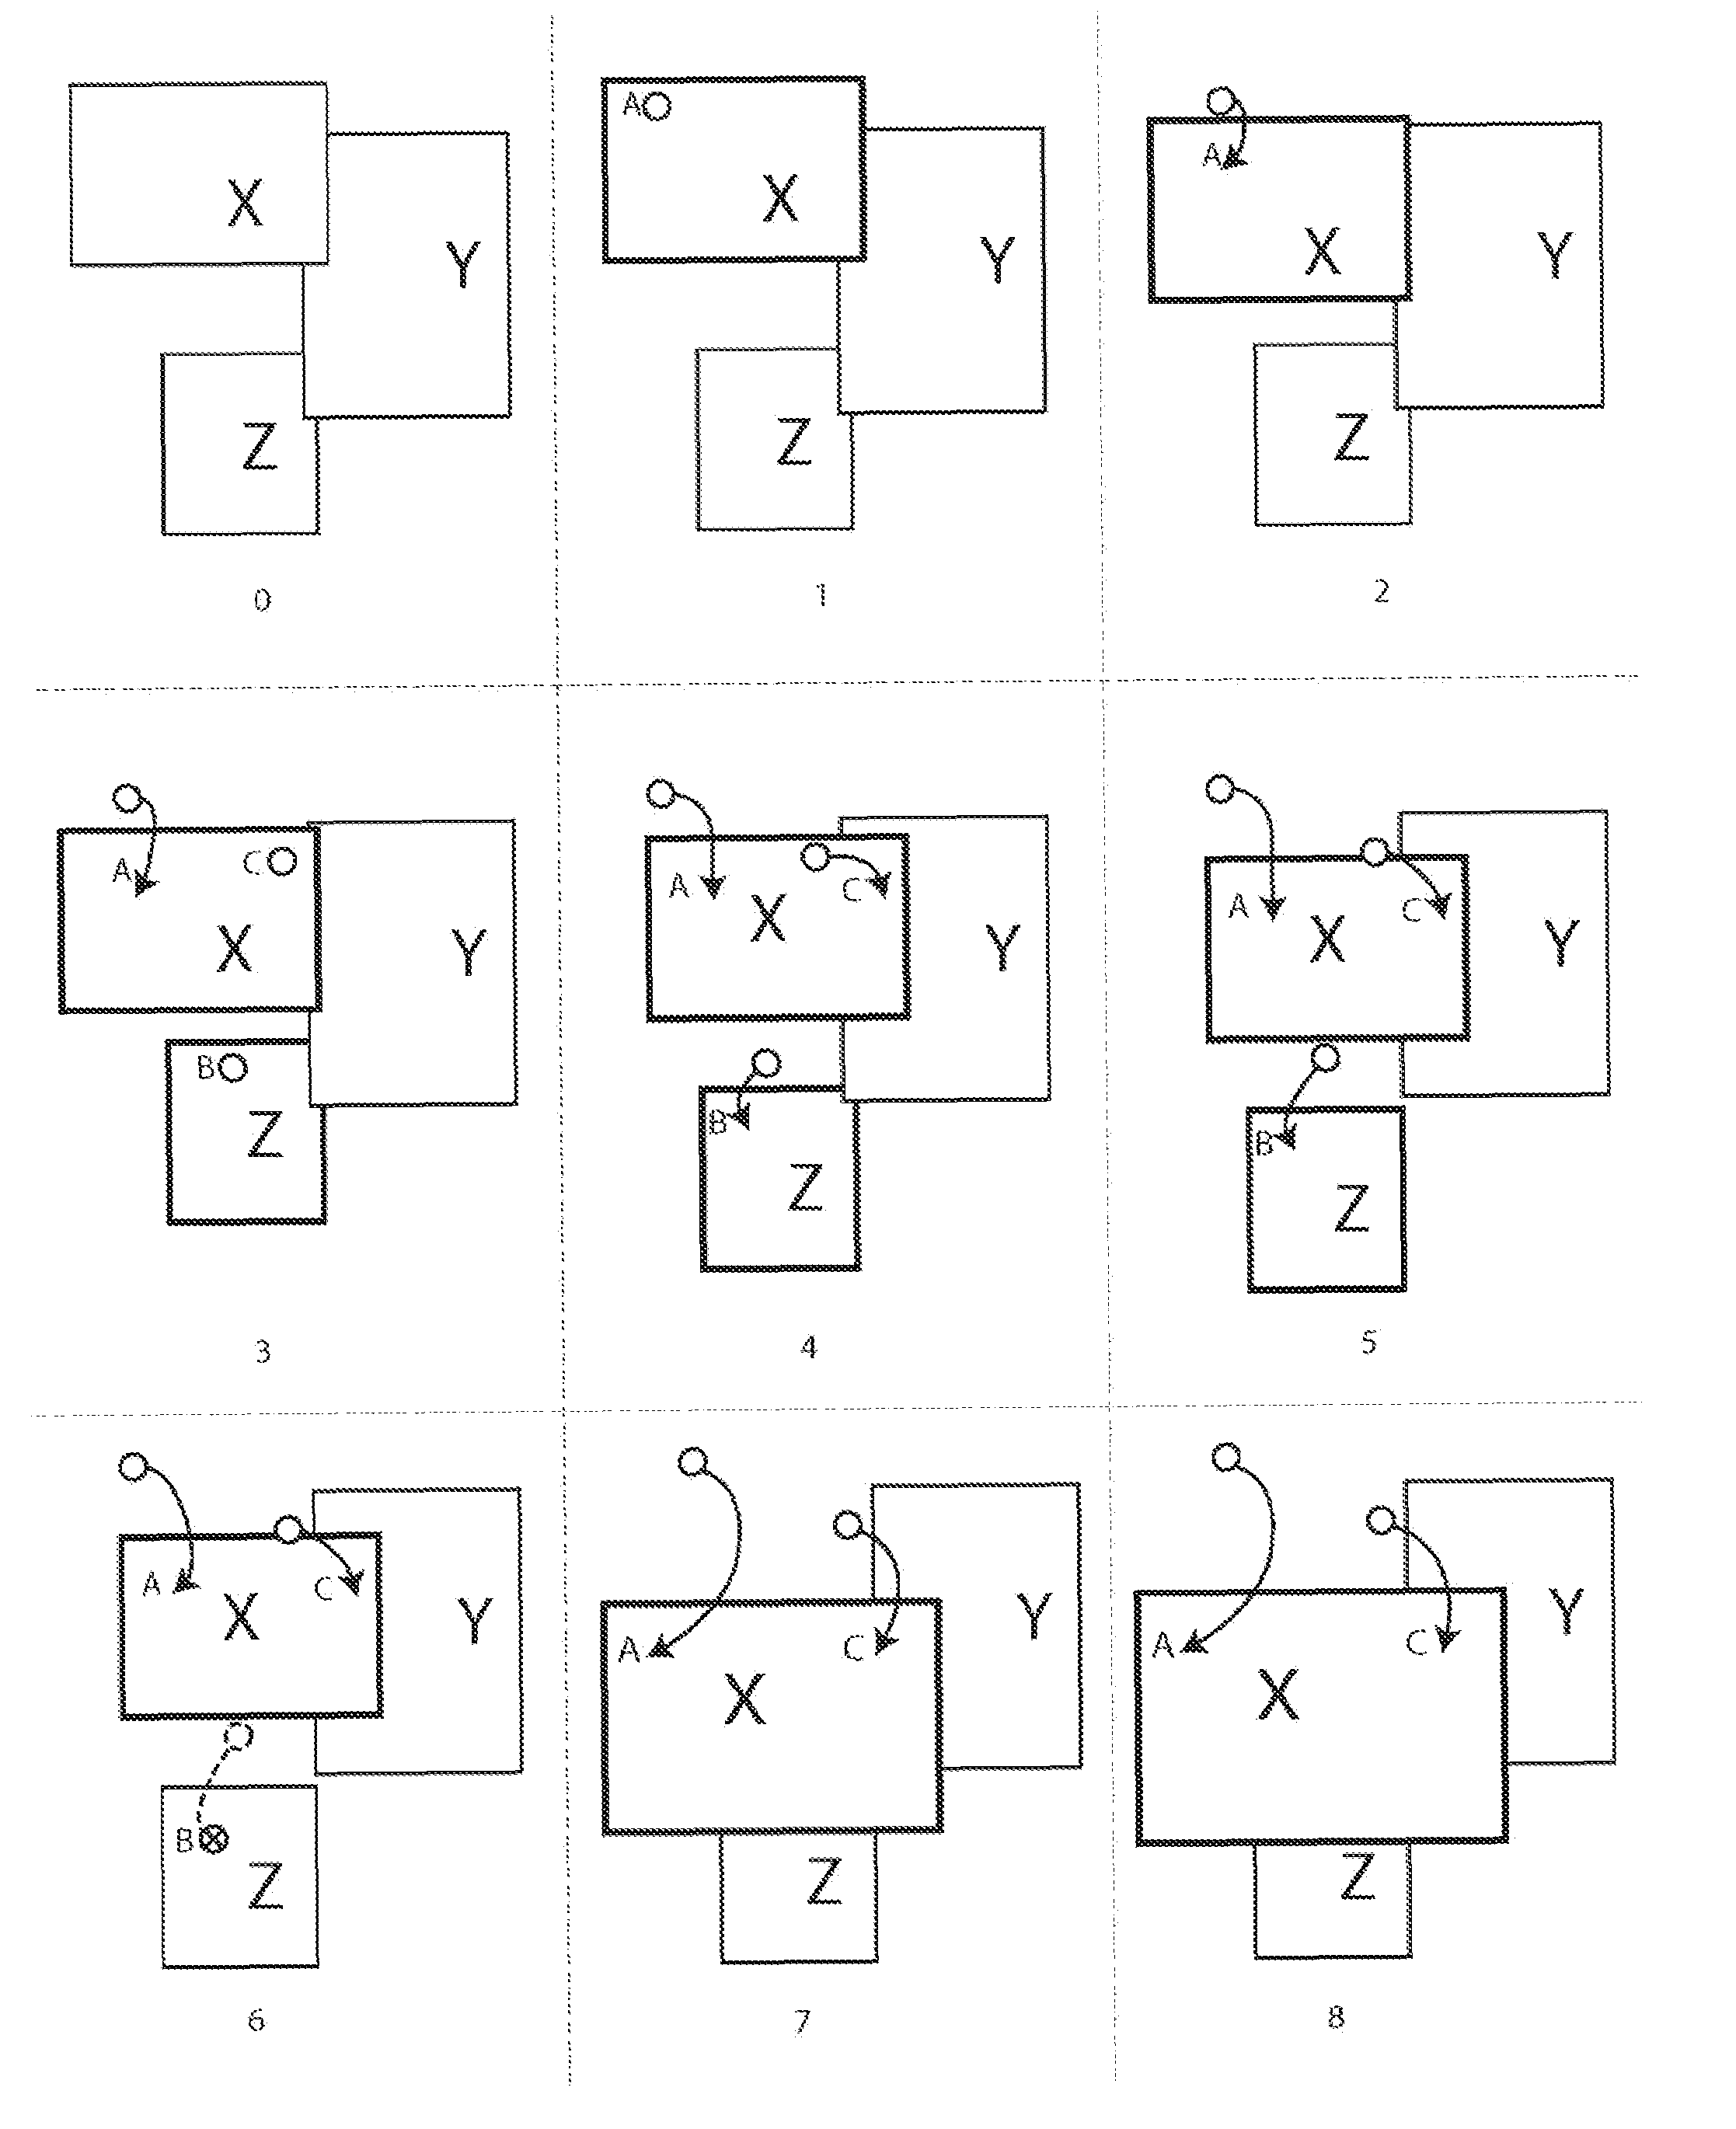 Event registration and dispatch system and method for multi-point controls